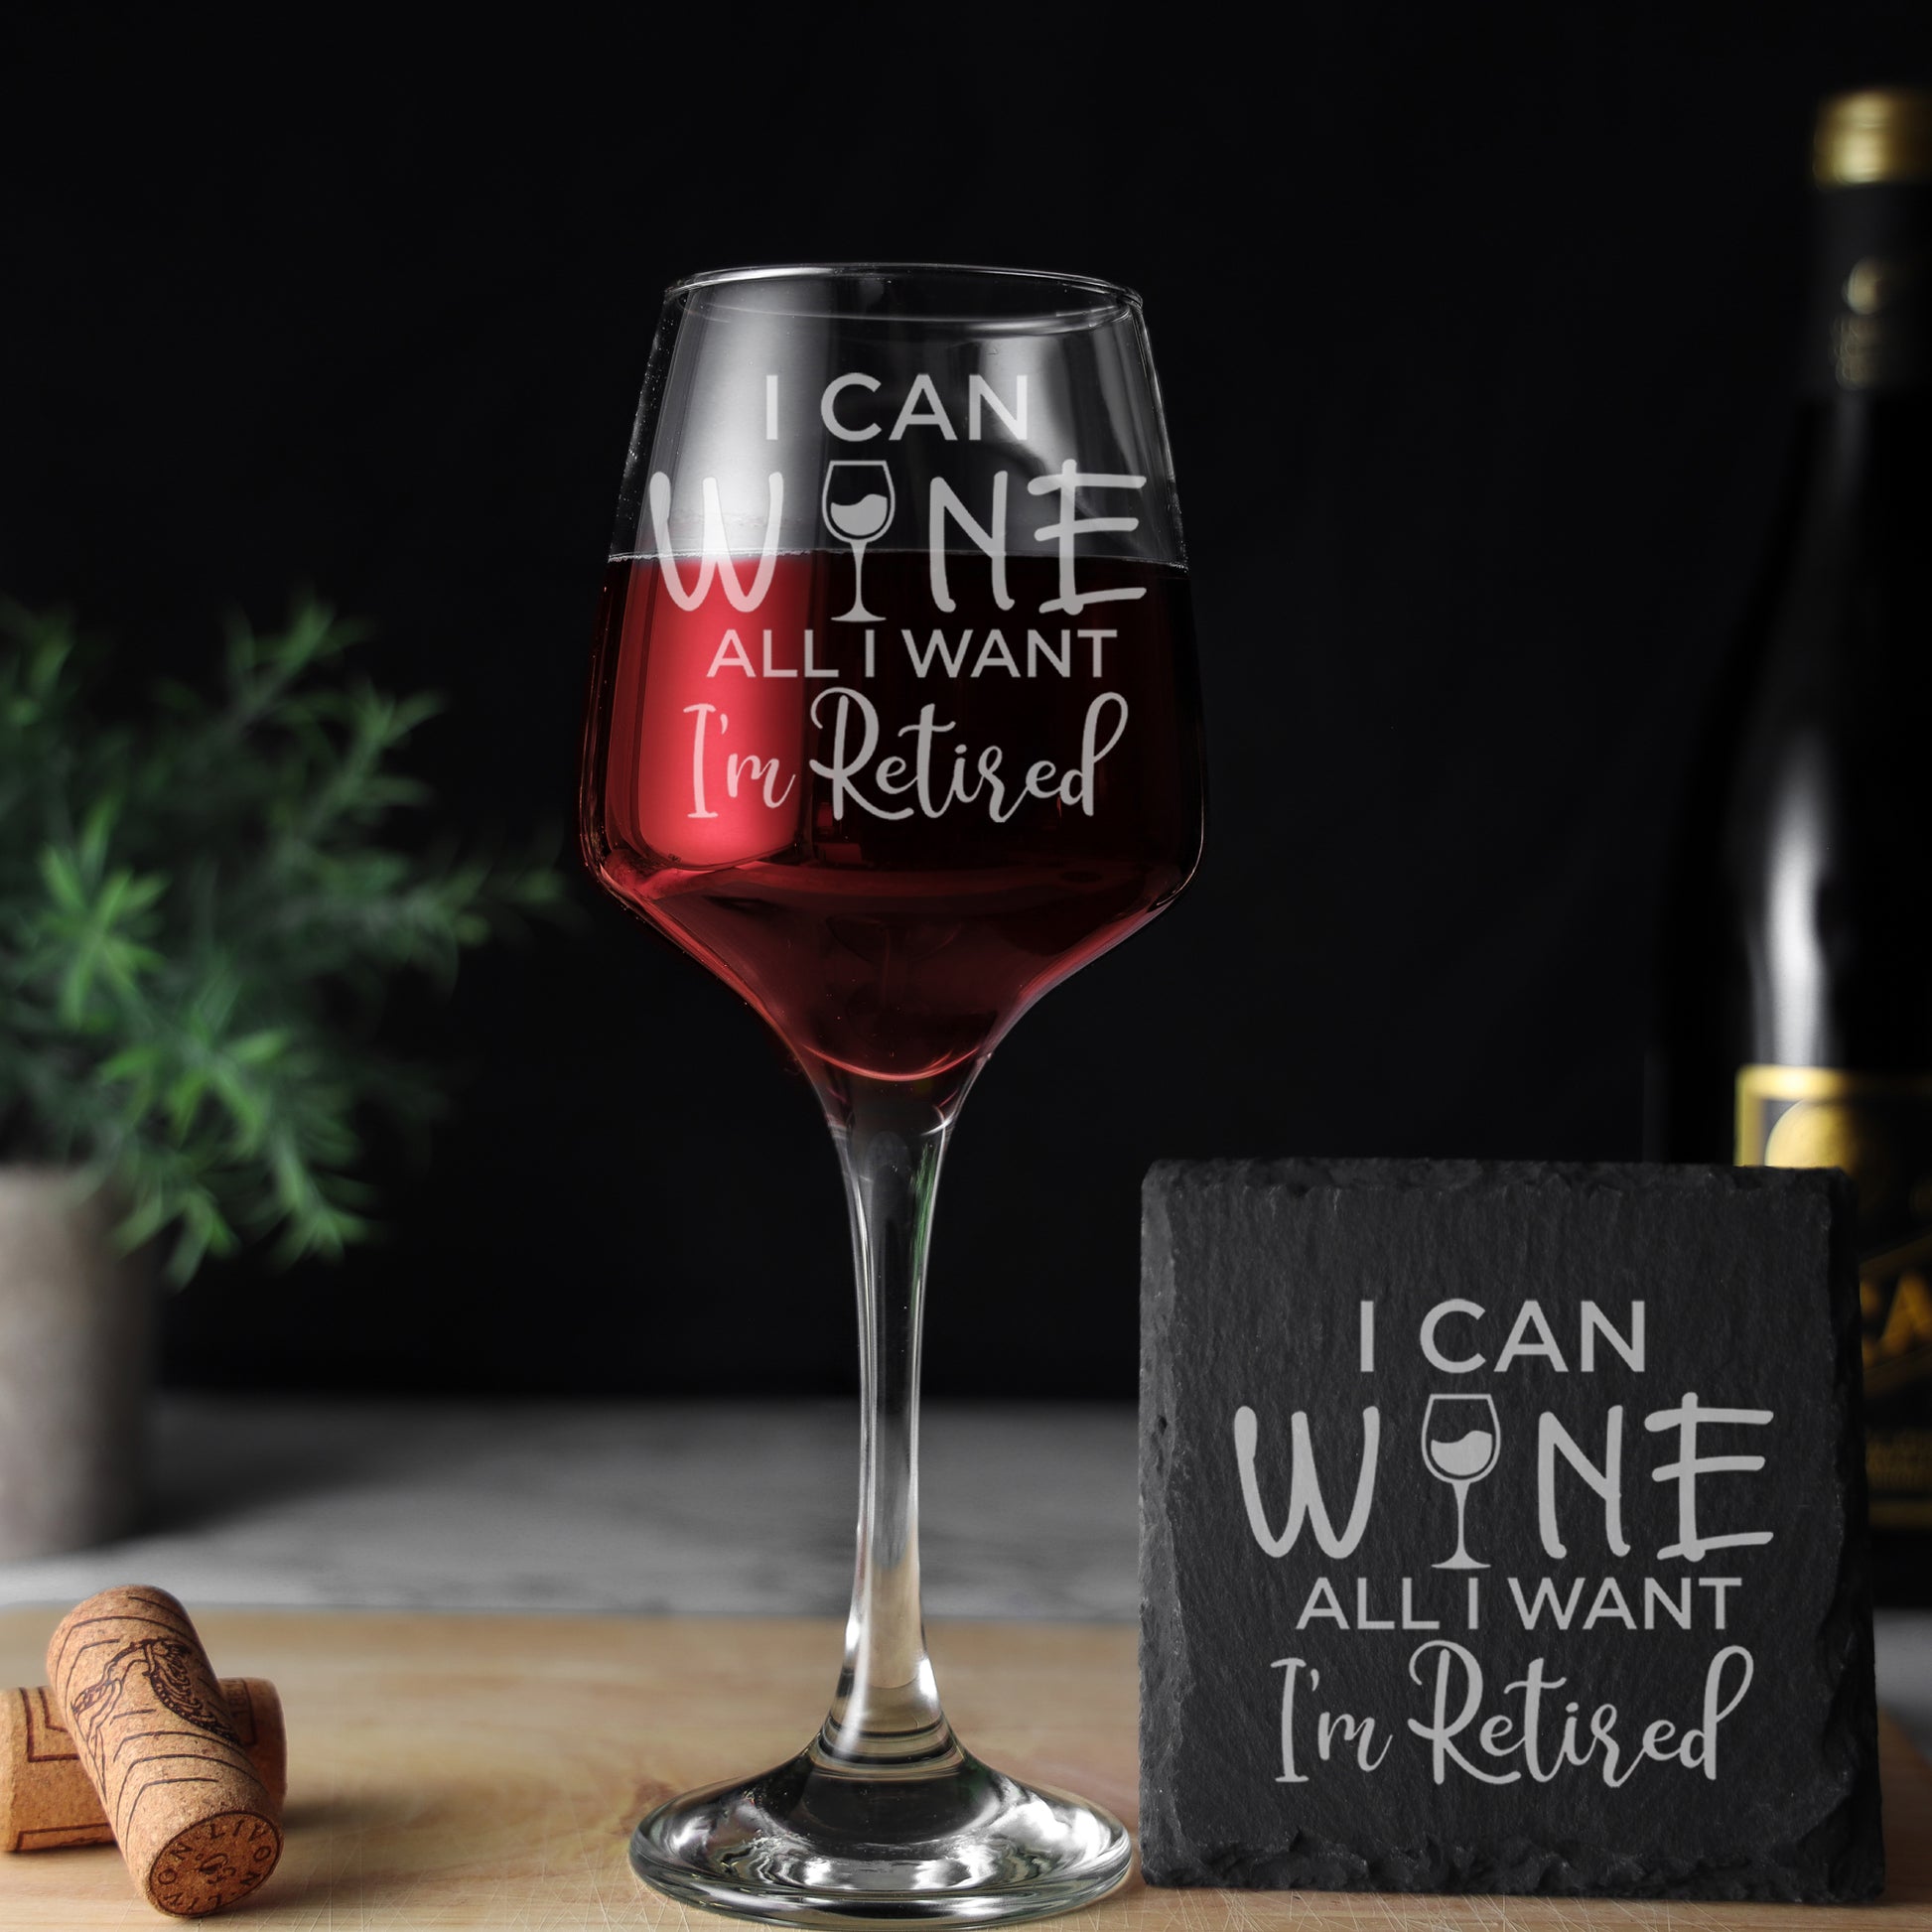 Engraved "I can wine all I want I'm retired" Funny Retirements and/or Coaster Novelty Gift  - Always Looking Good - Glass & Square Coaster  